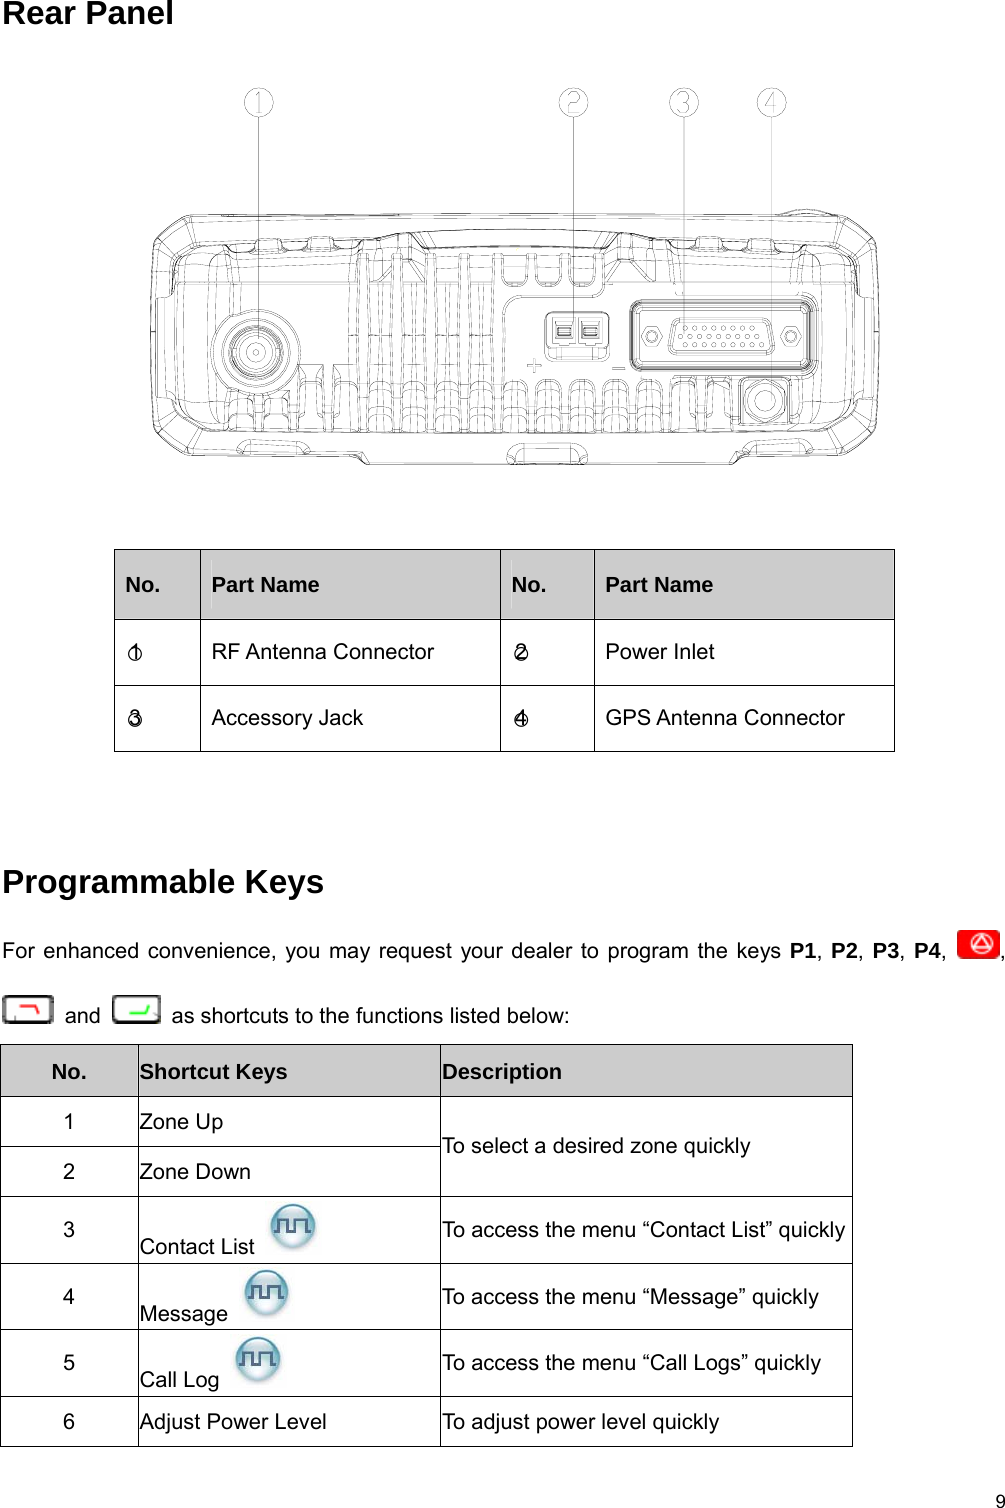 9 Rear Panel     No. Part Name No. Part Name ○1  RF Antenna Connector    ○2  Power Inlet   ○3  Accessory Jack  ○4  GPS Antenna Connector     Programmable Keys For enhanced convenience, you may request your dealer to program the keys P1, P2,  P3, P4,  ,  and    as shortcuts to the functions listed below:   No.   Shortcut Keys Description   1 Zone Up 2 Zone Down To select a desired zone quickly 3  Contact List   To access the menu “Contact List” quickly 4  Message   To access the menu “Message” quickly 5  Call Log   To access the menu “Call Logs” quickly 6  Adjust Power Level  To adjust power level quickly   